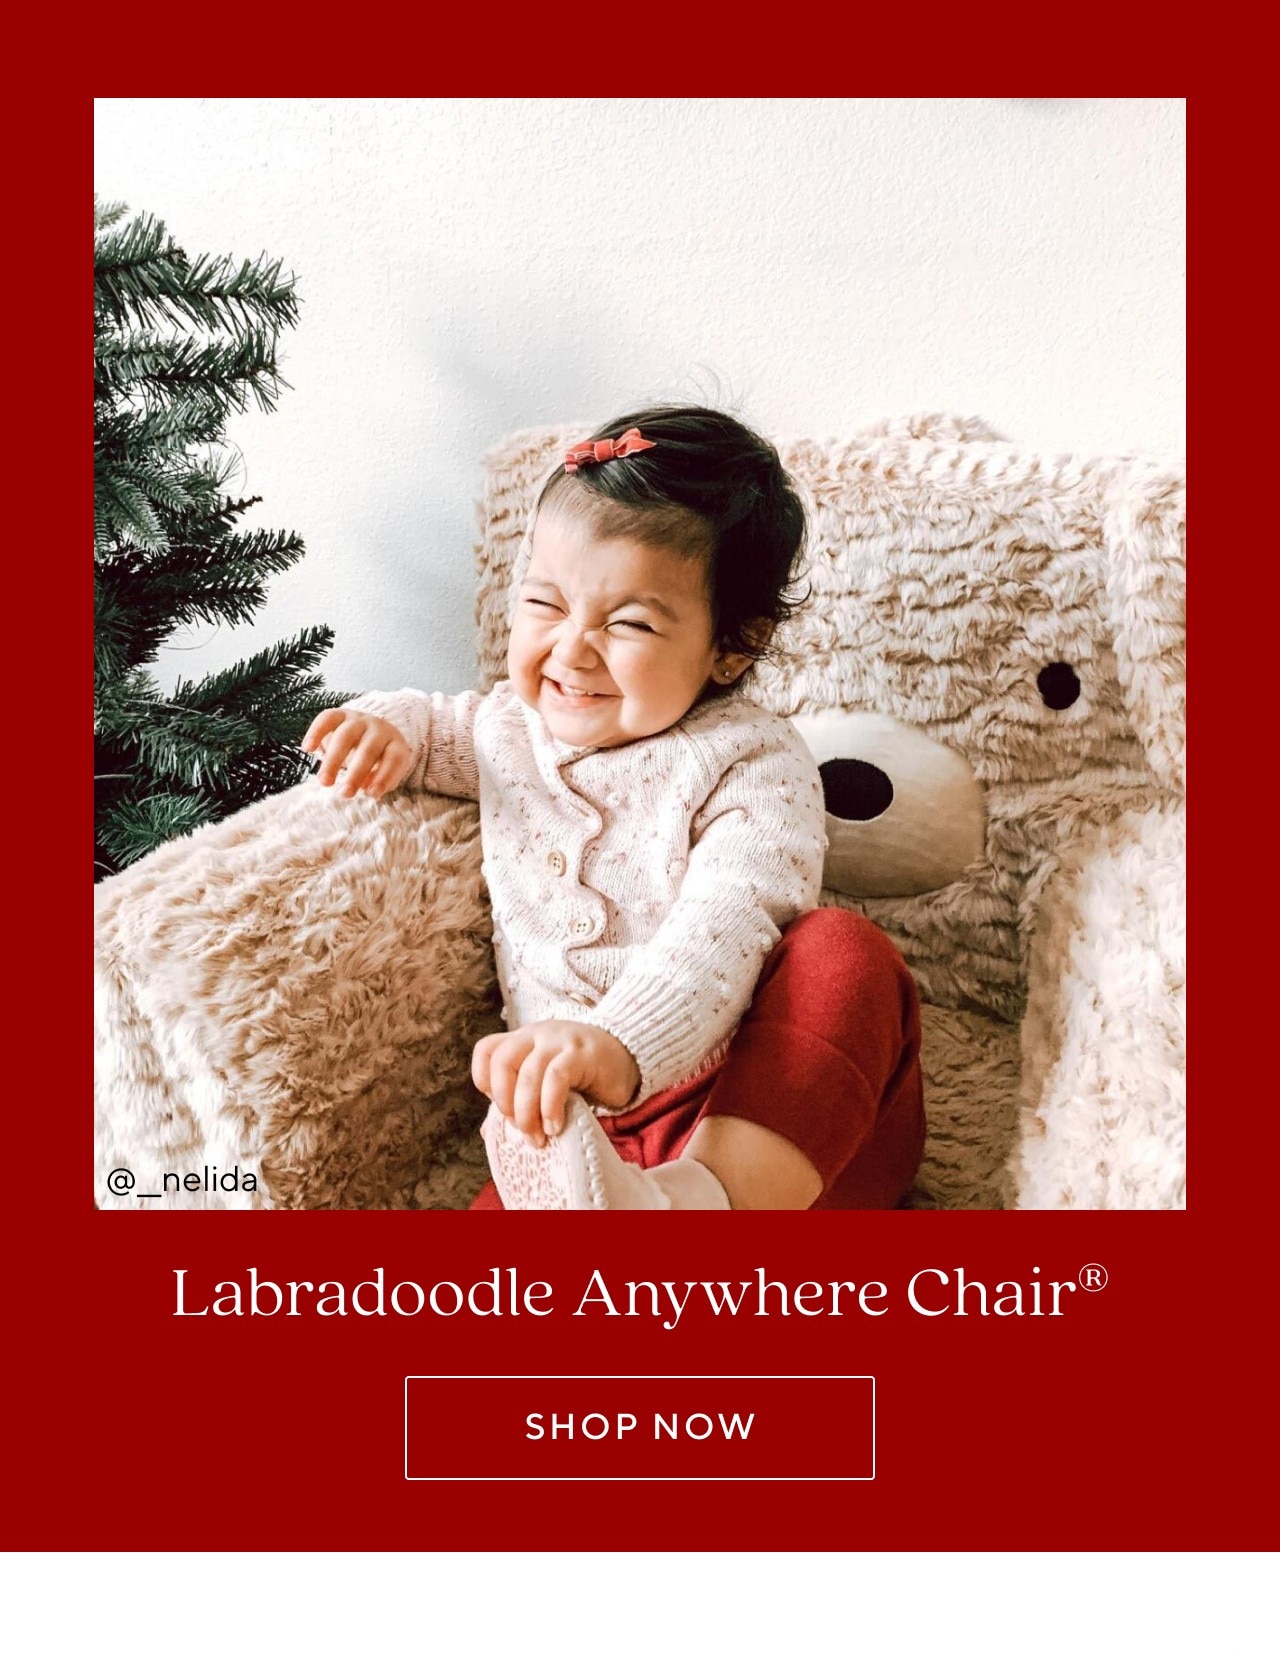 LABRADOODLE ANYWHERE CHAIR